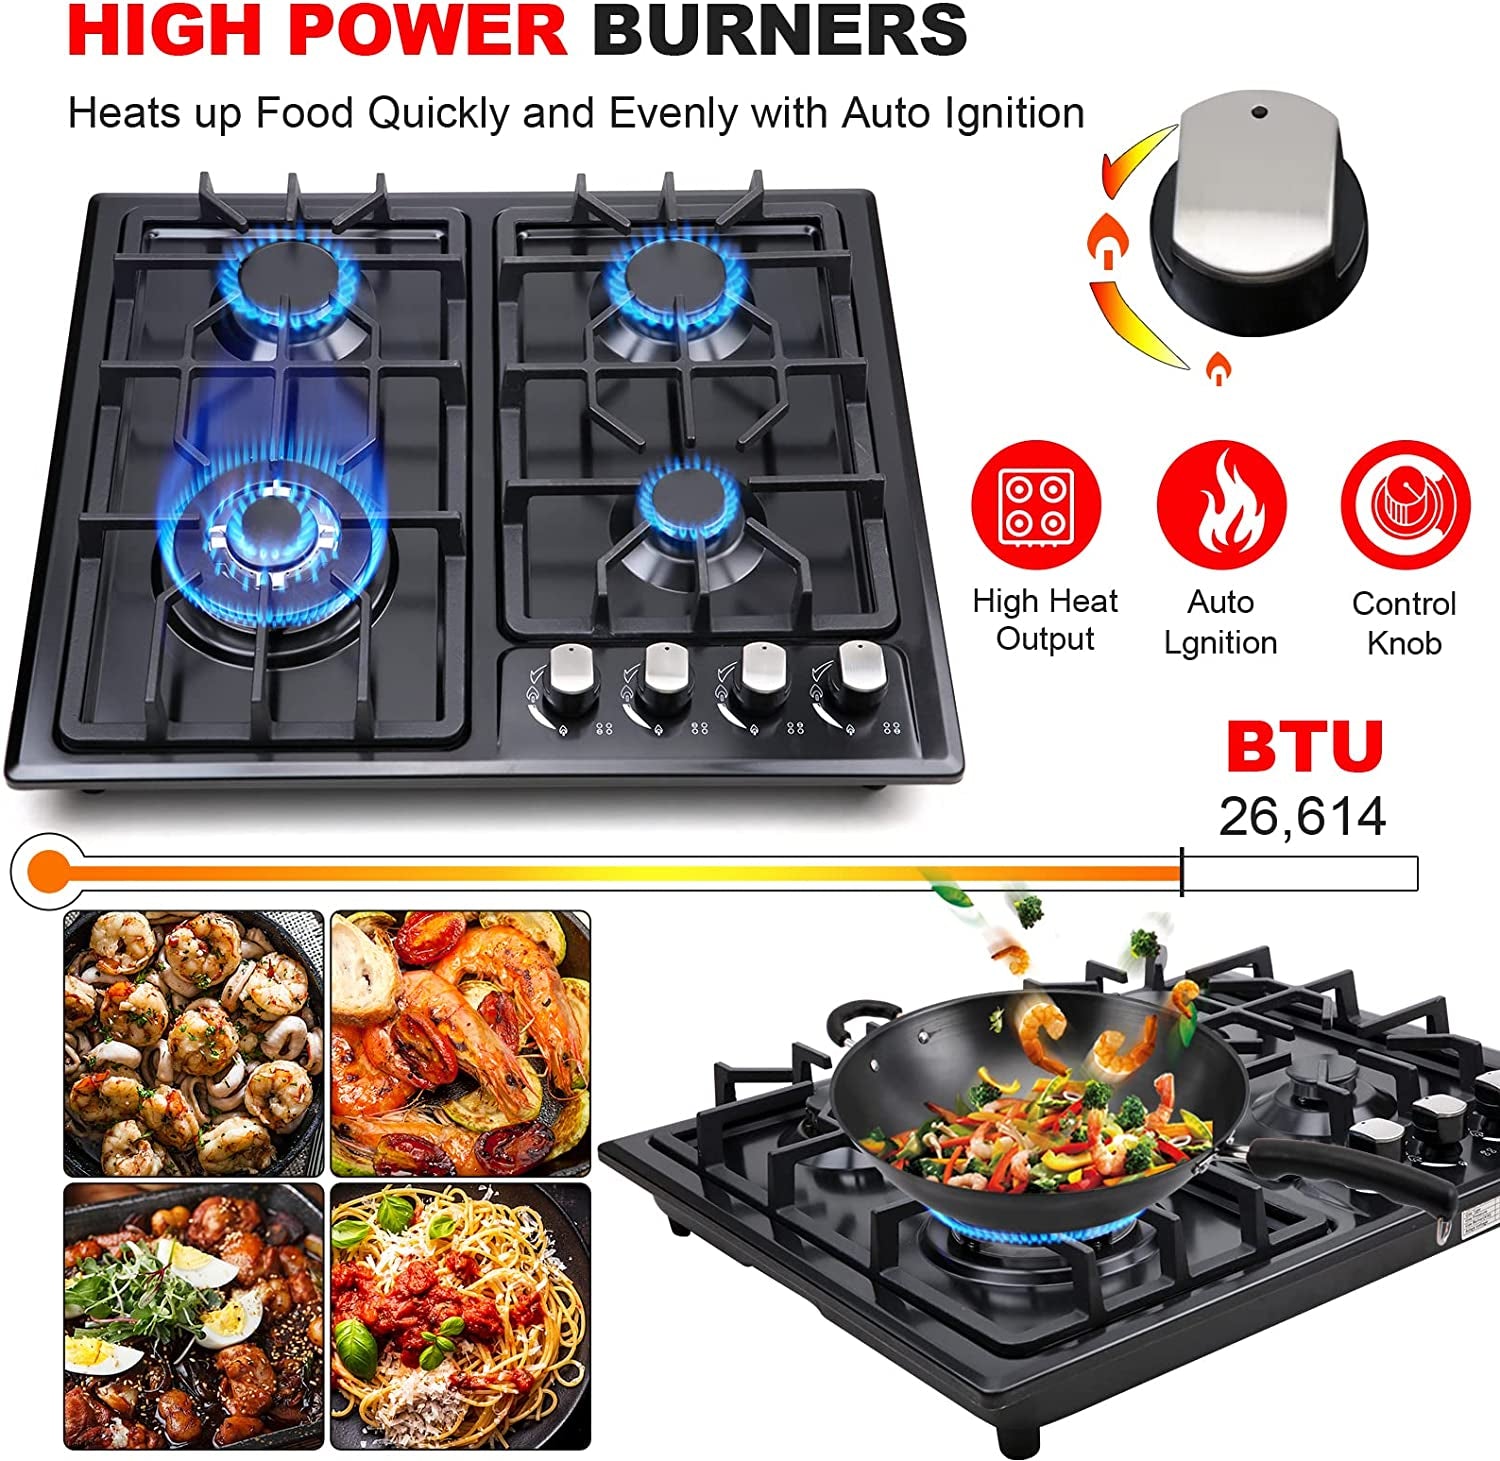 22-Inch Built-In Stainless Steel Gas Cooktop with 4 Burners, NG/LPG Conversion Kit, Thermocouple Protection, and Easy-Clean Design